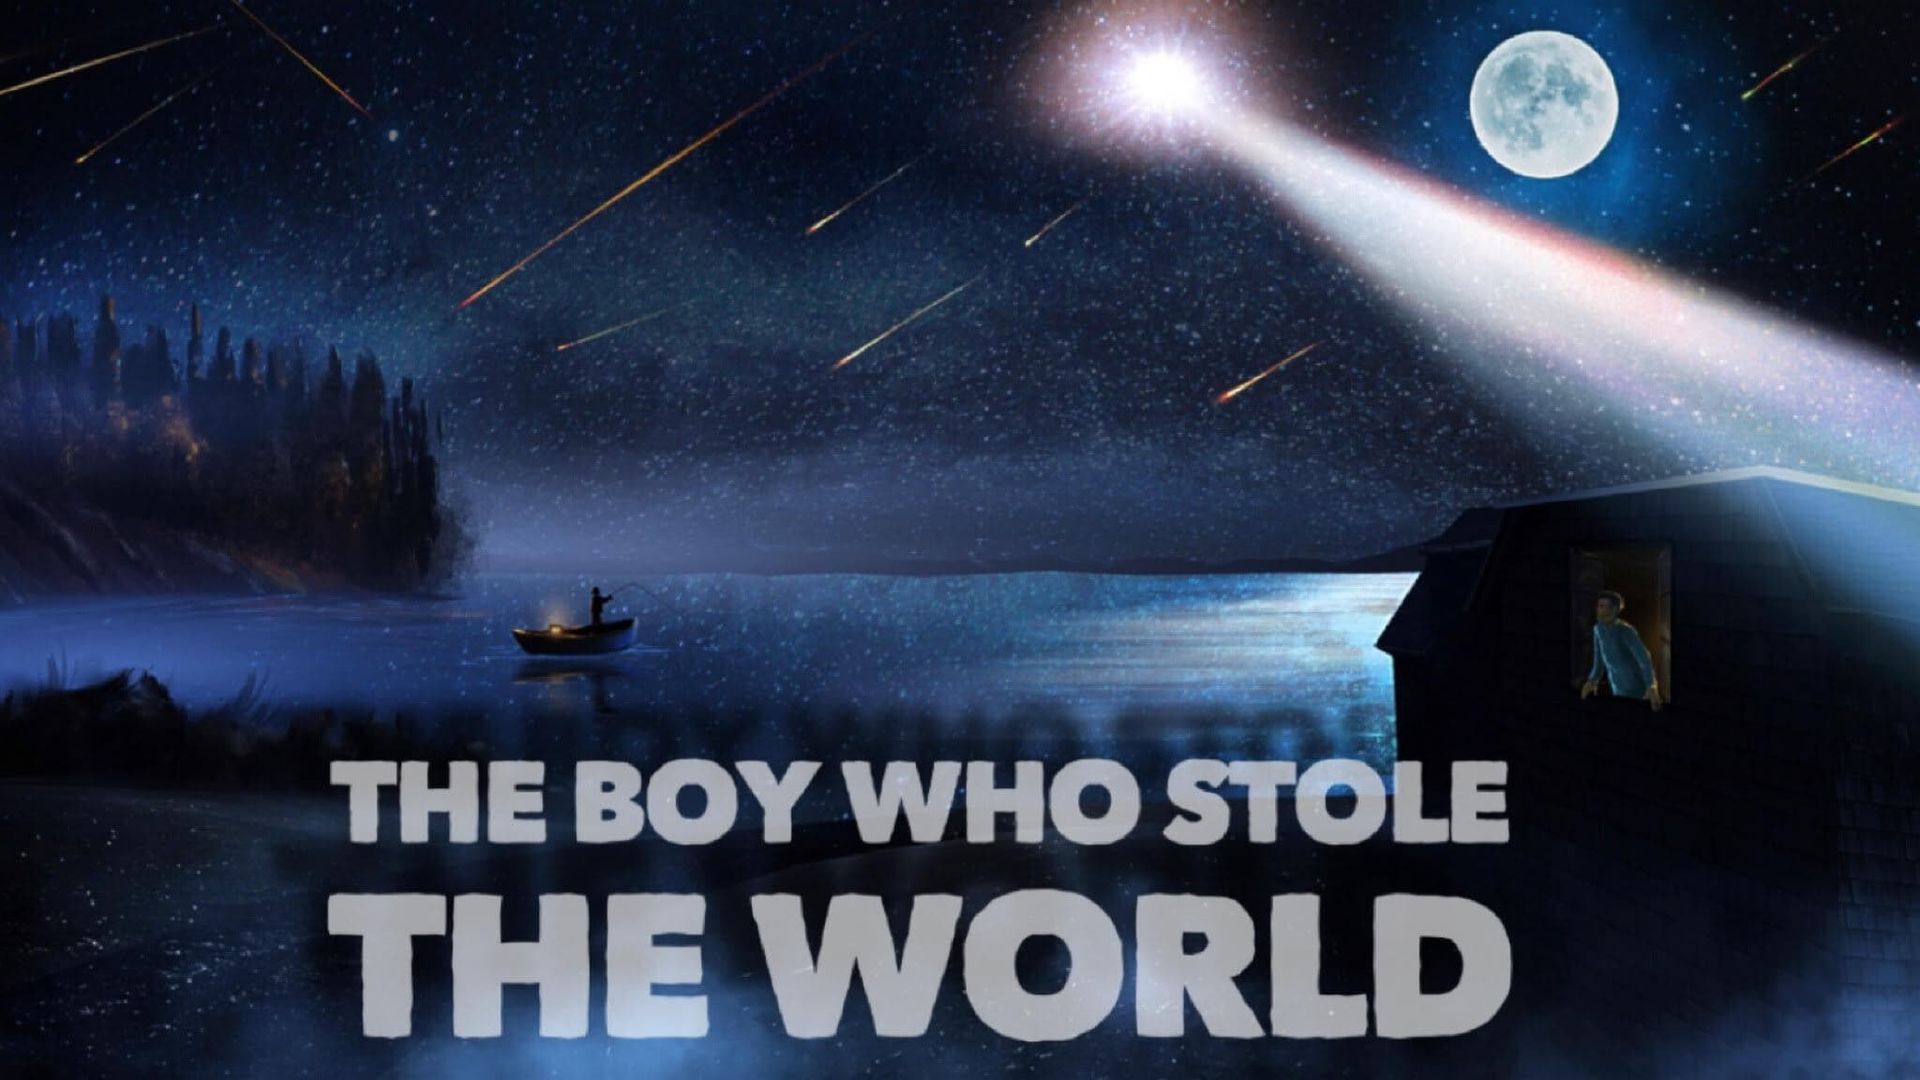 The Boy Who Stole the World background